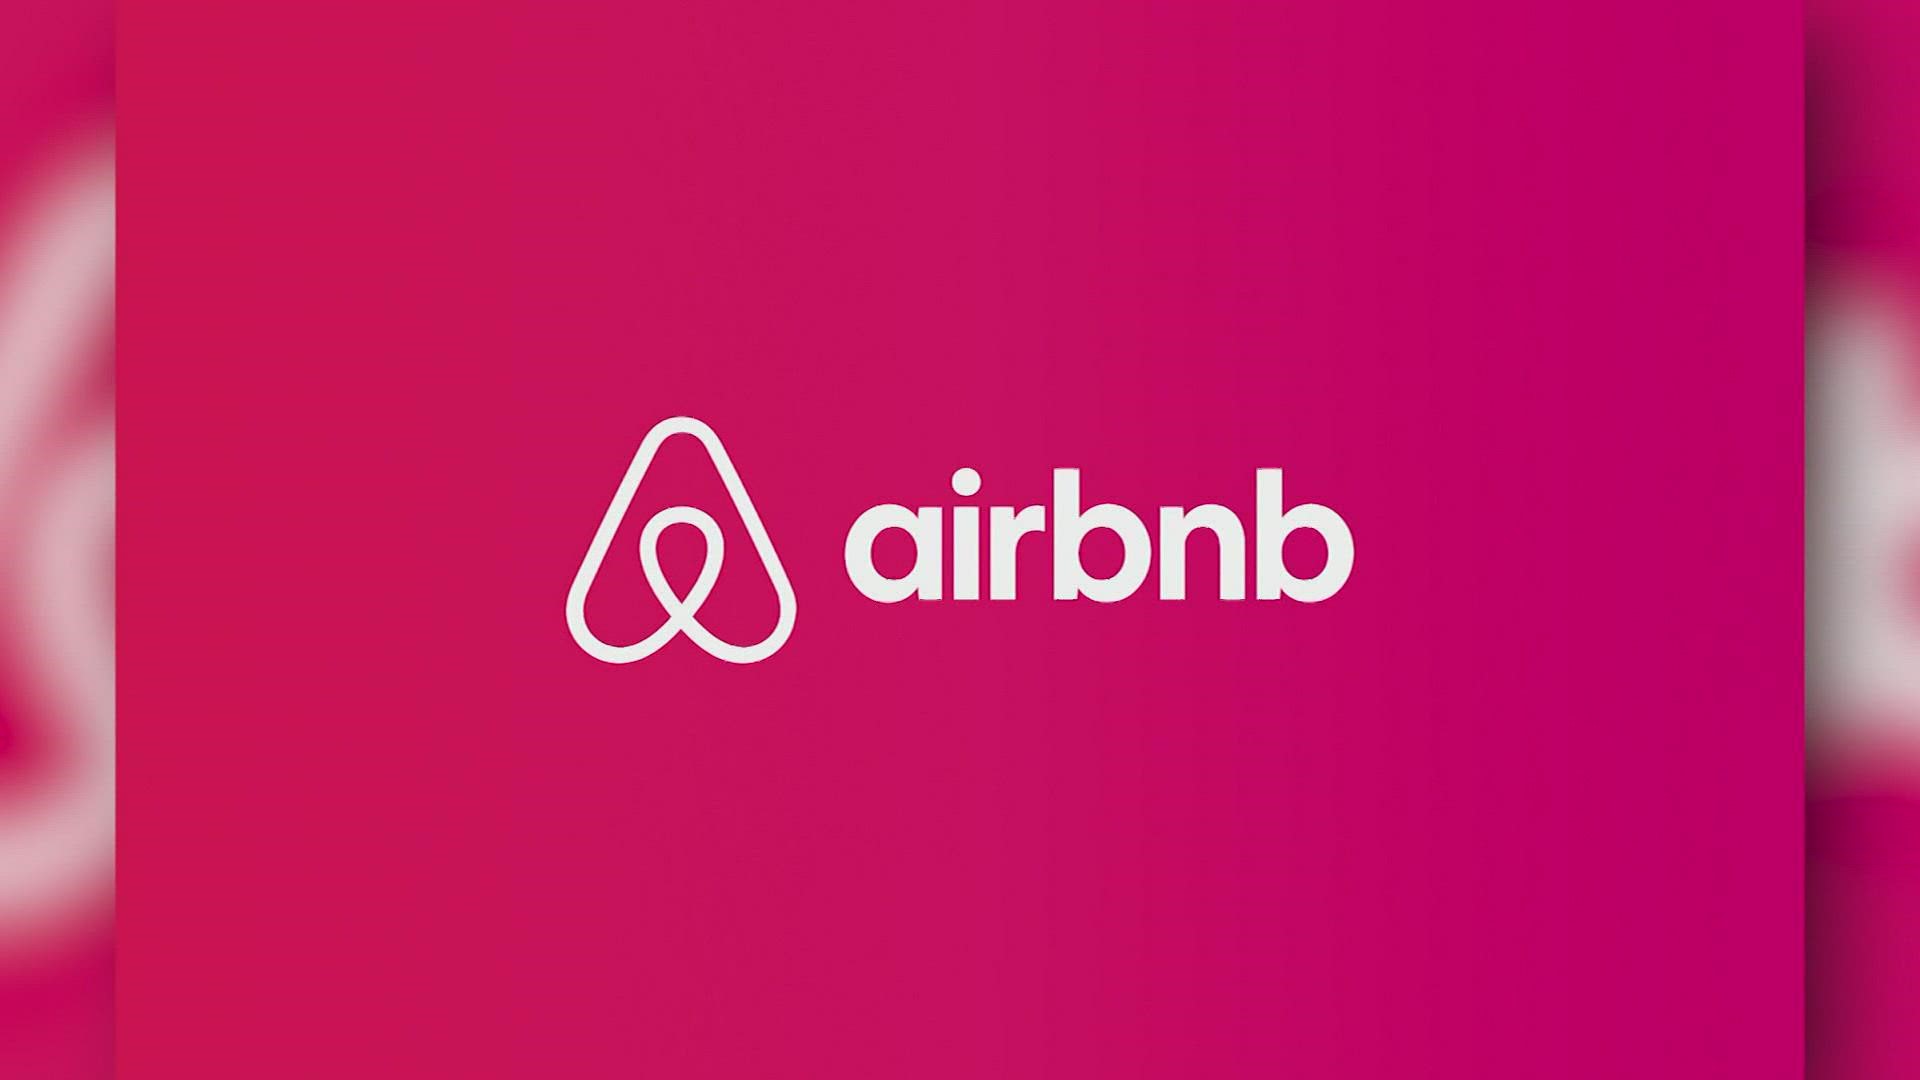 Airbnb said Tuesday that the new system examines the renter’s history on Airbnb, how far they live from the rental listing, and other factors.